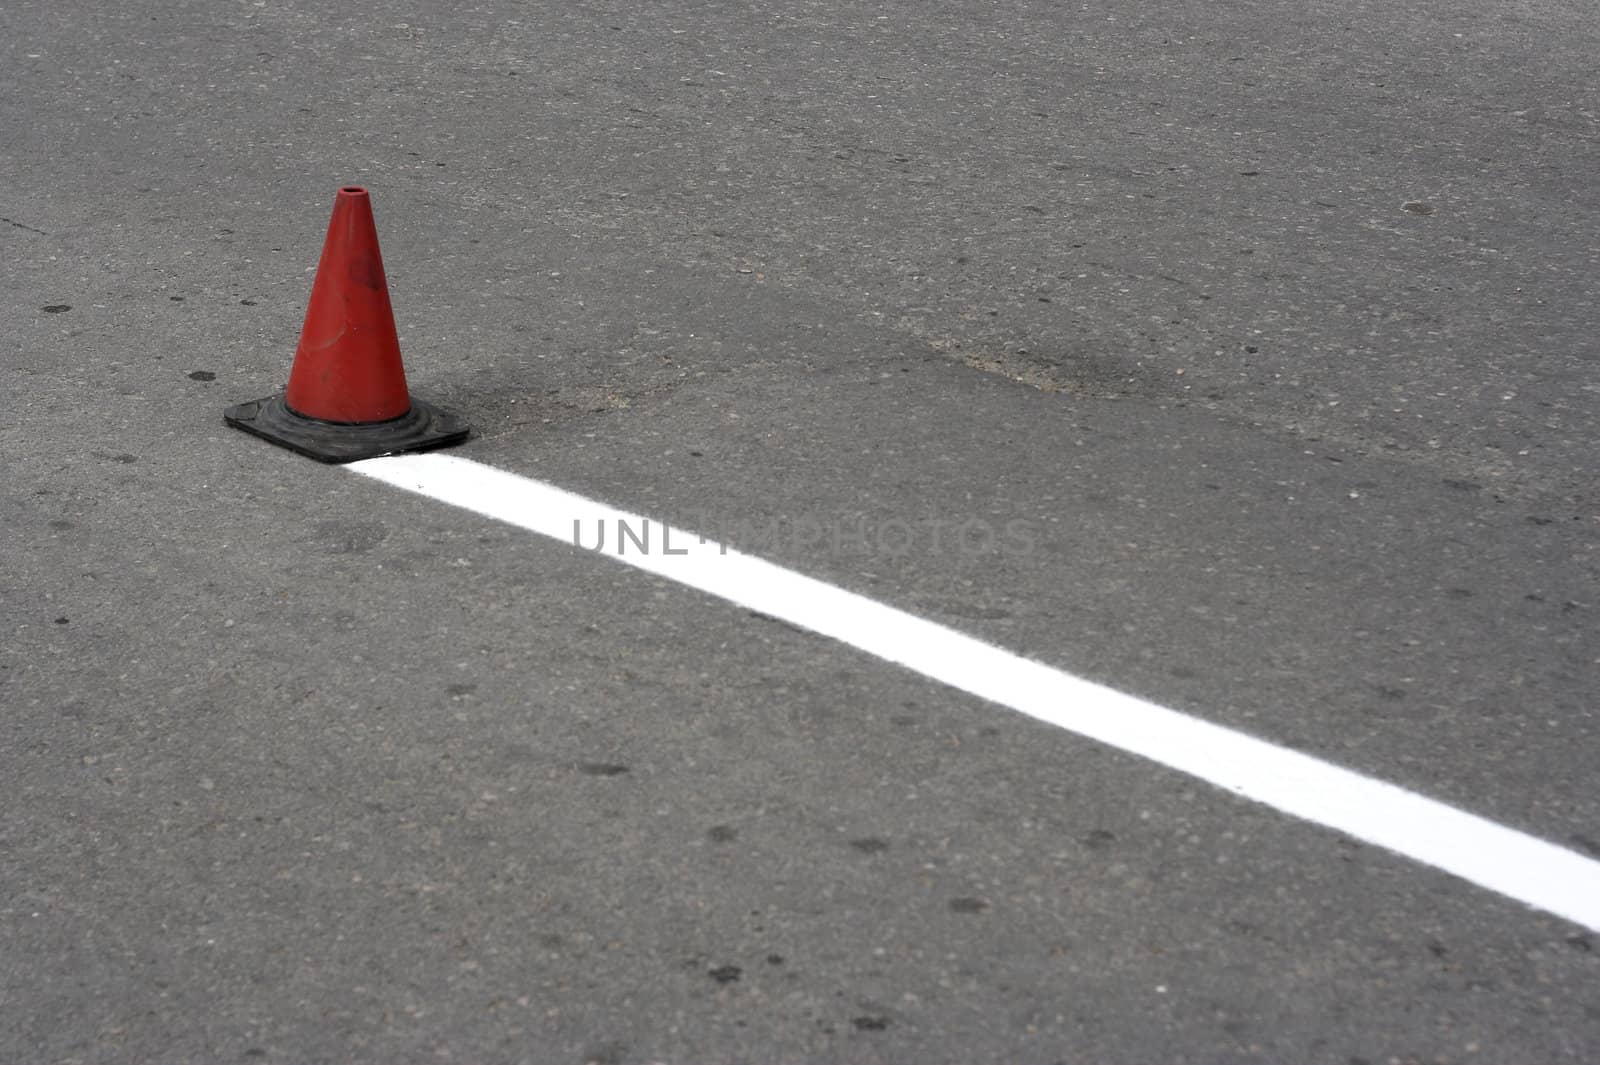 The road in construction-cone